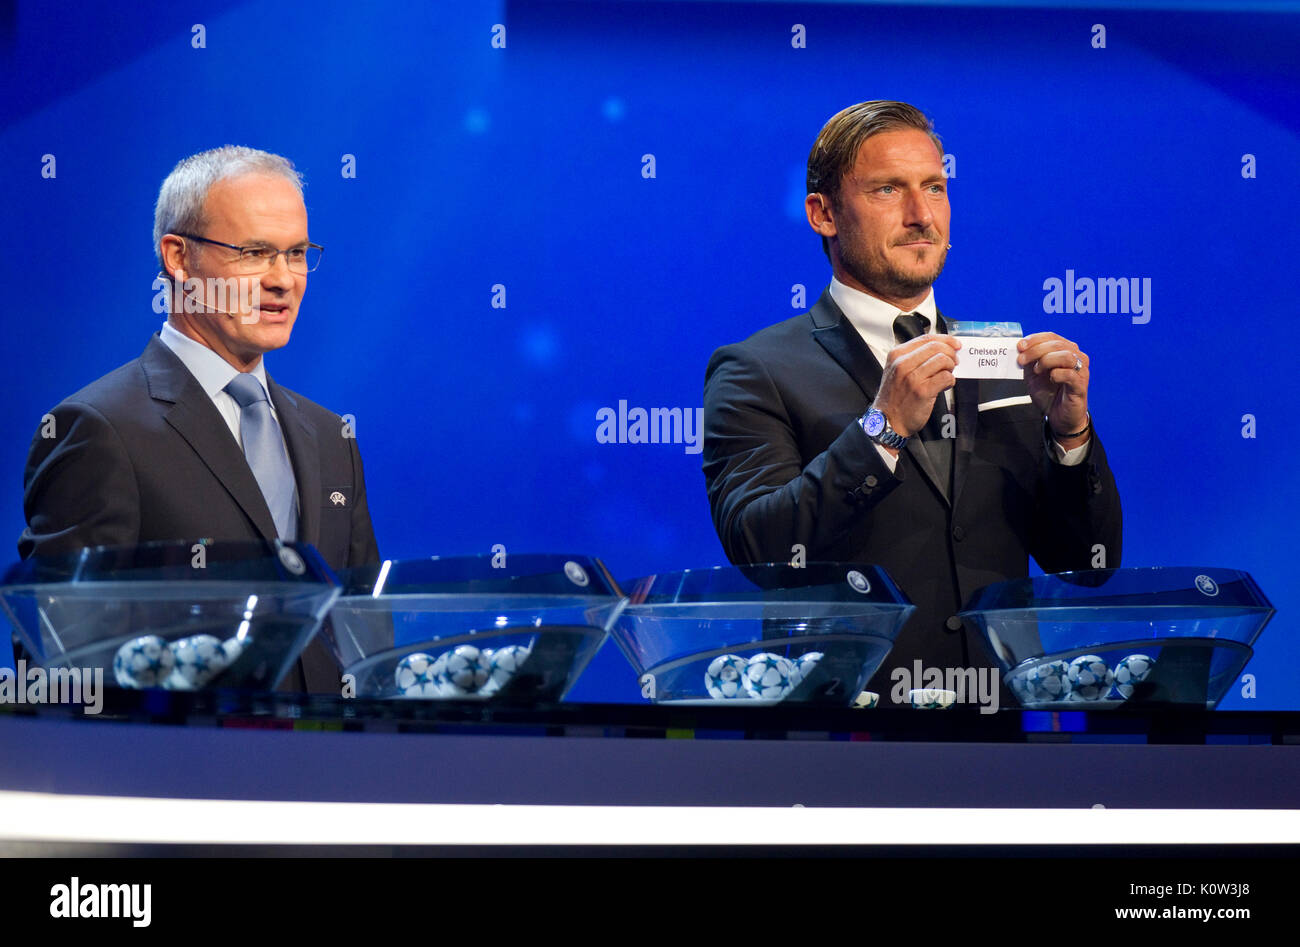 Monaco, Monte Carlo - August 24, 2017: UEFA Champions League Group Stage  Draw and Player of the